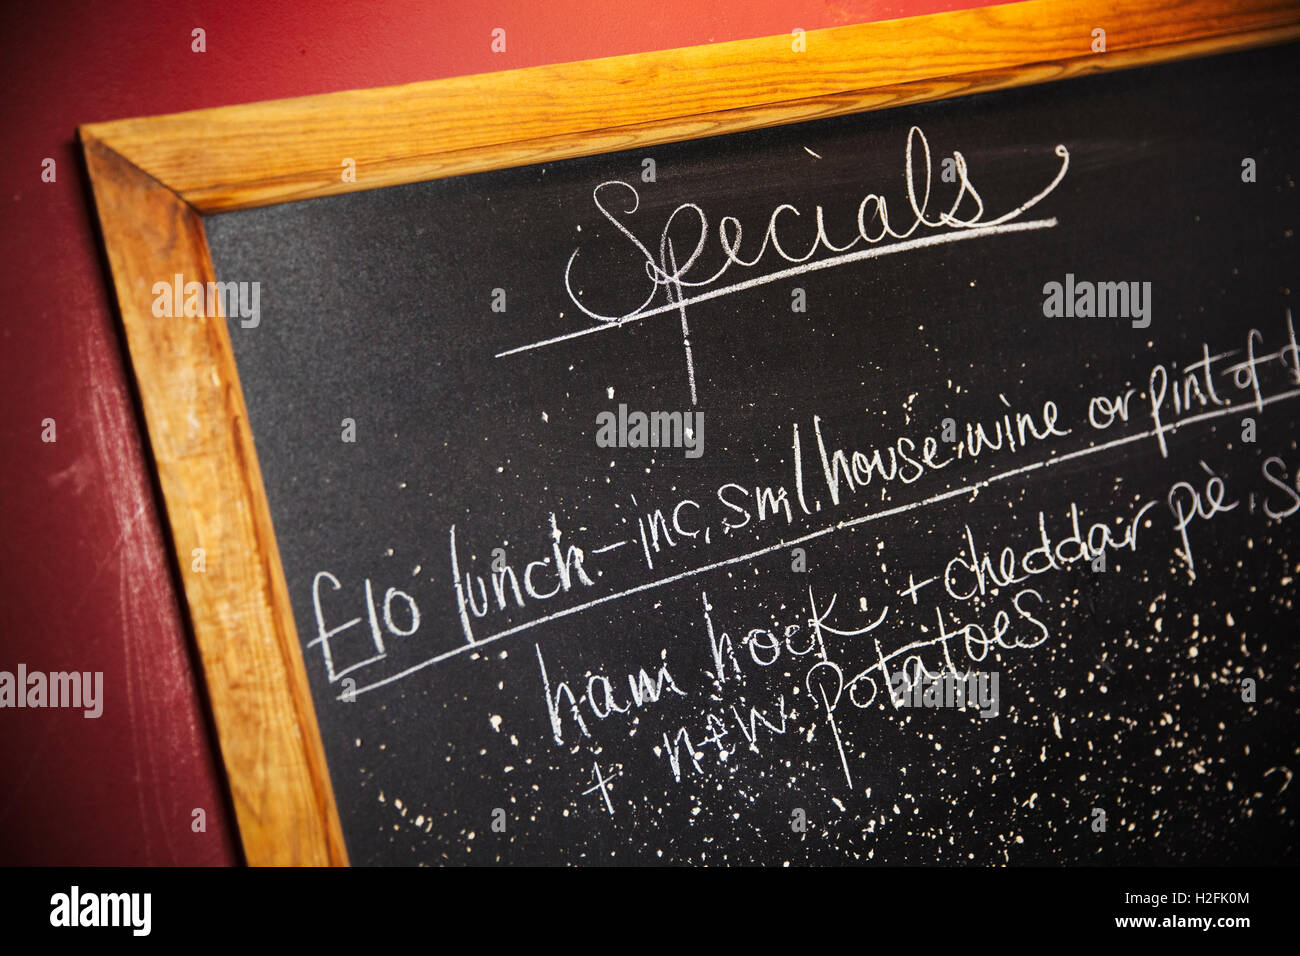 A village public house menu chalked blackboard. Fixed price set menu for lunch. Stock Photo